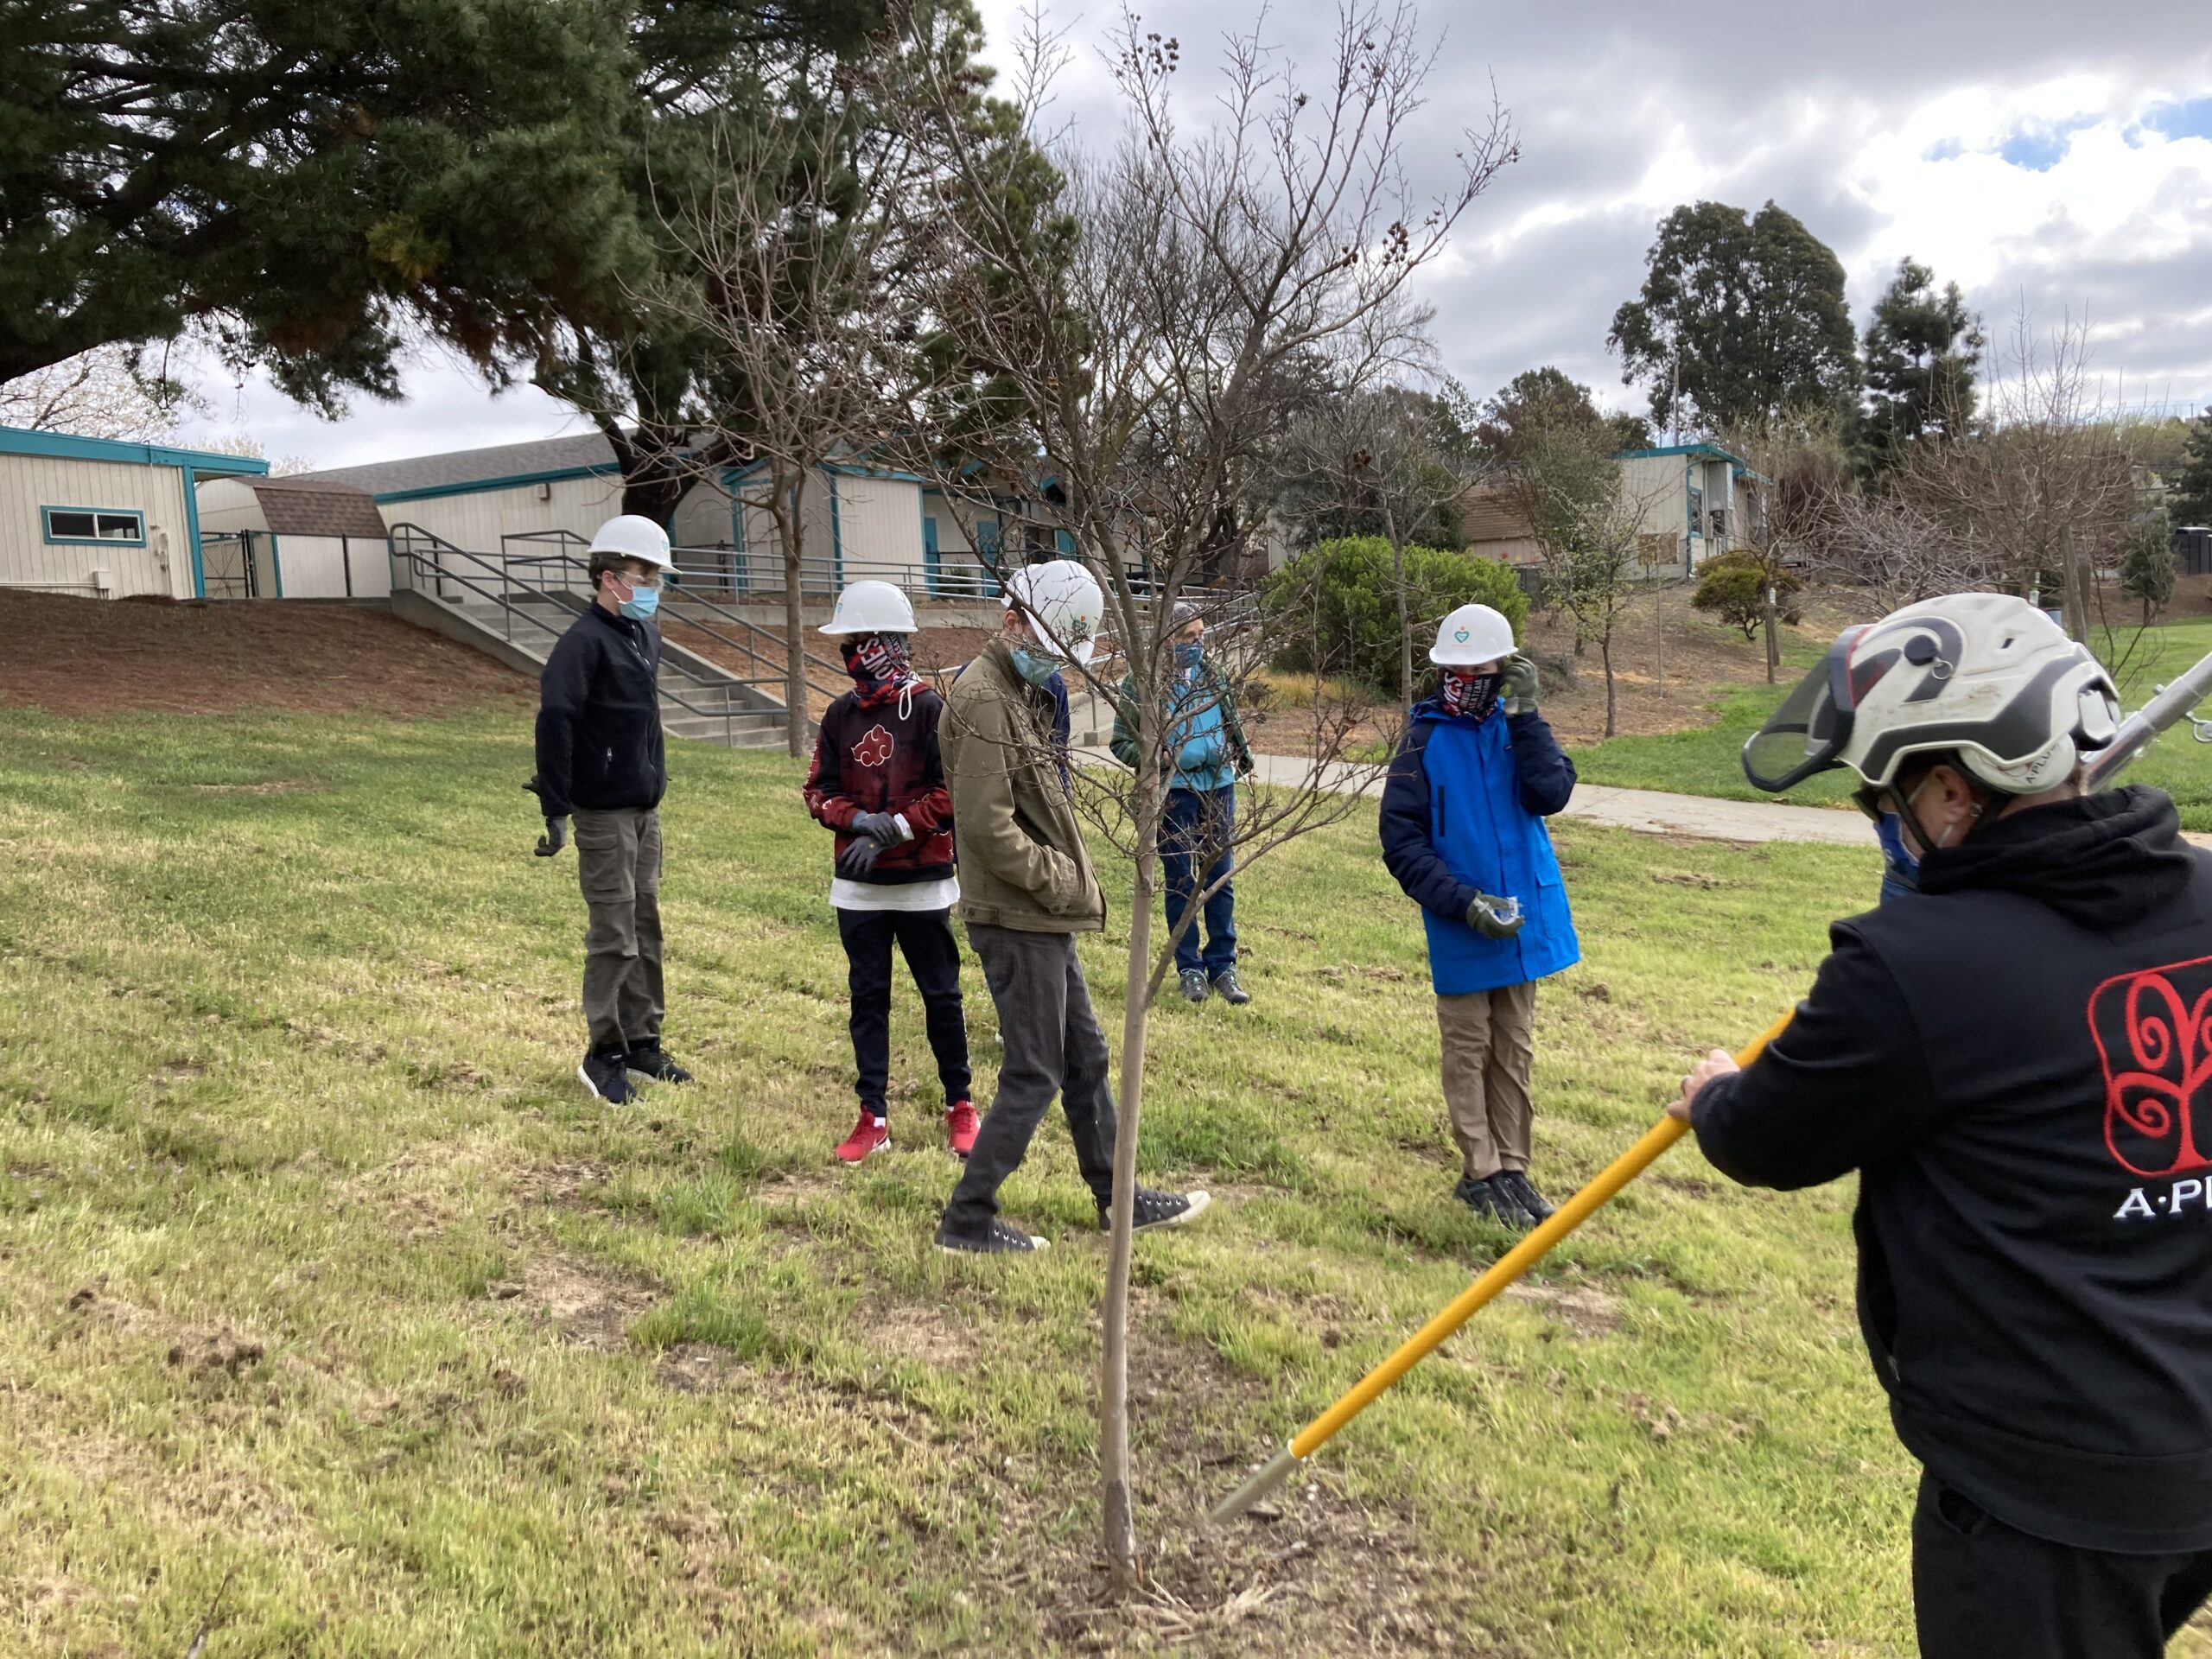 Peter Green, arborist with A-Plus Tree Service, points to a wound at the base of a Crepe Myrtle tree likely caused by the careless use of a weed wacker.